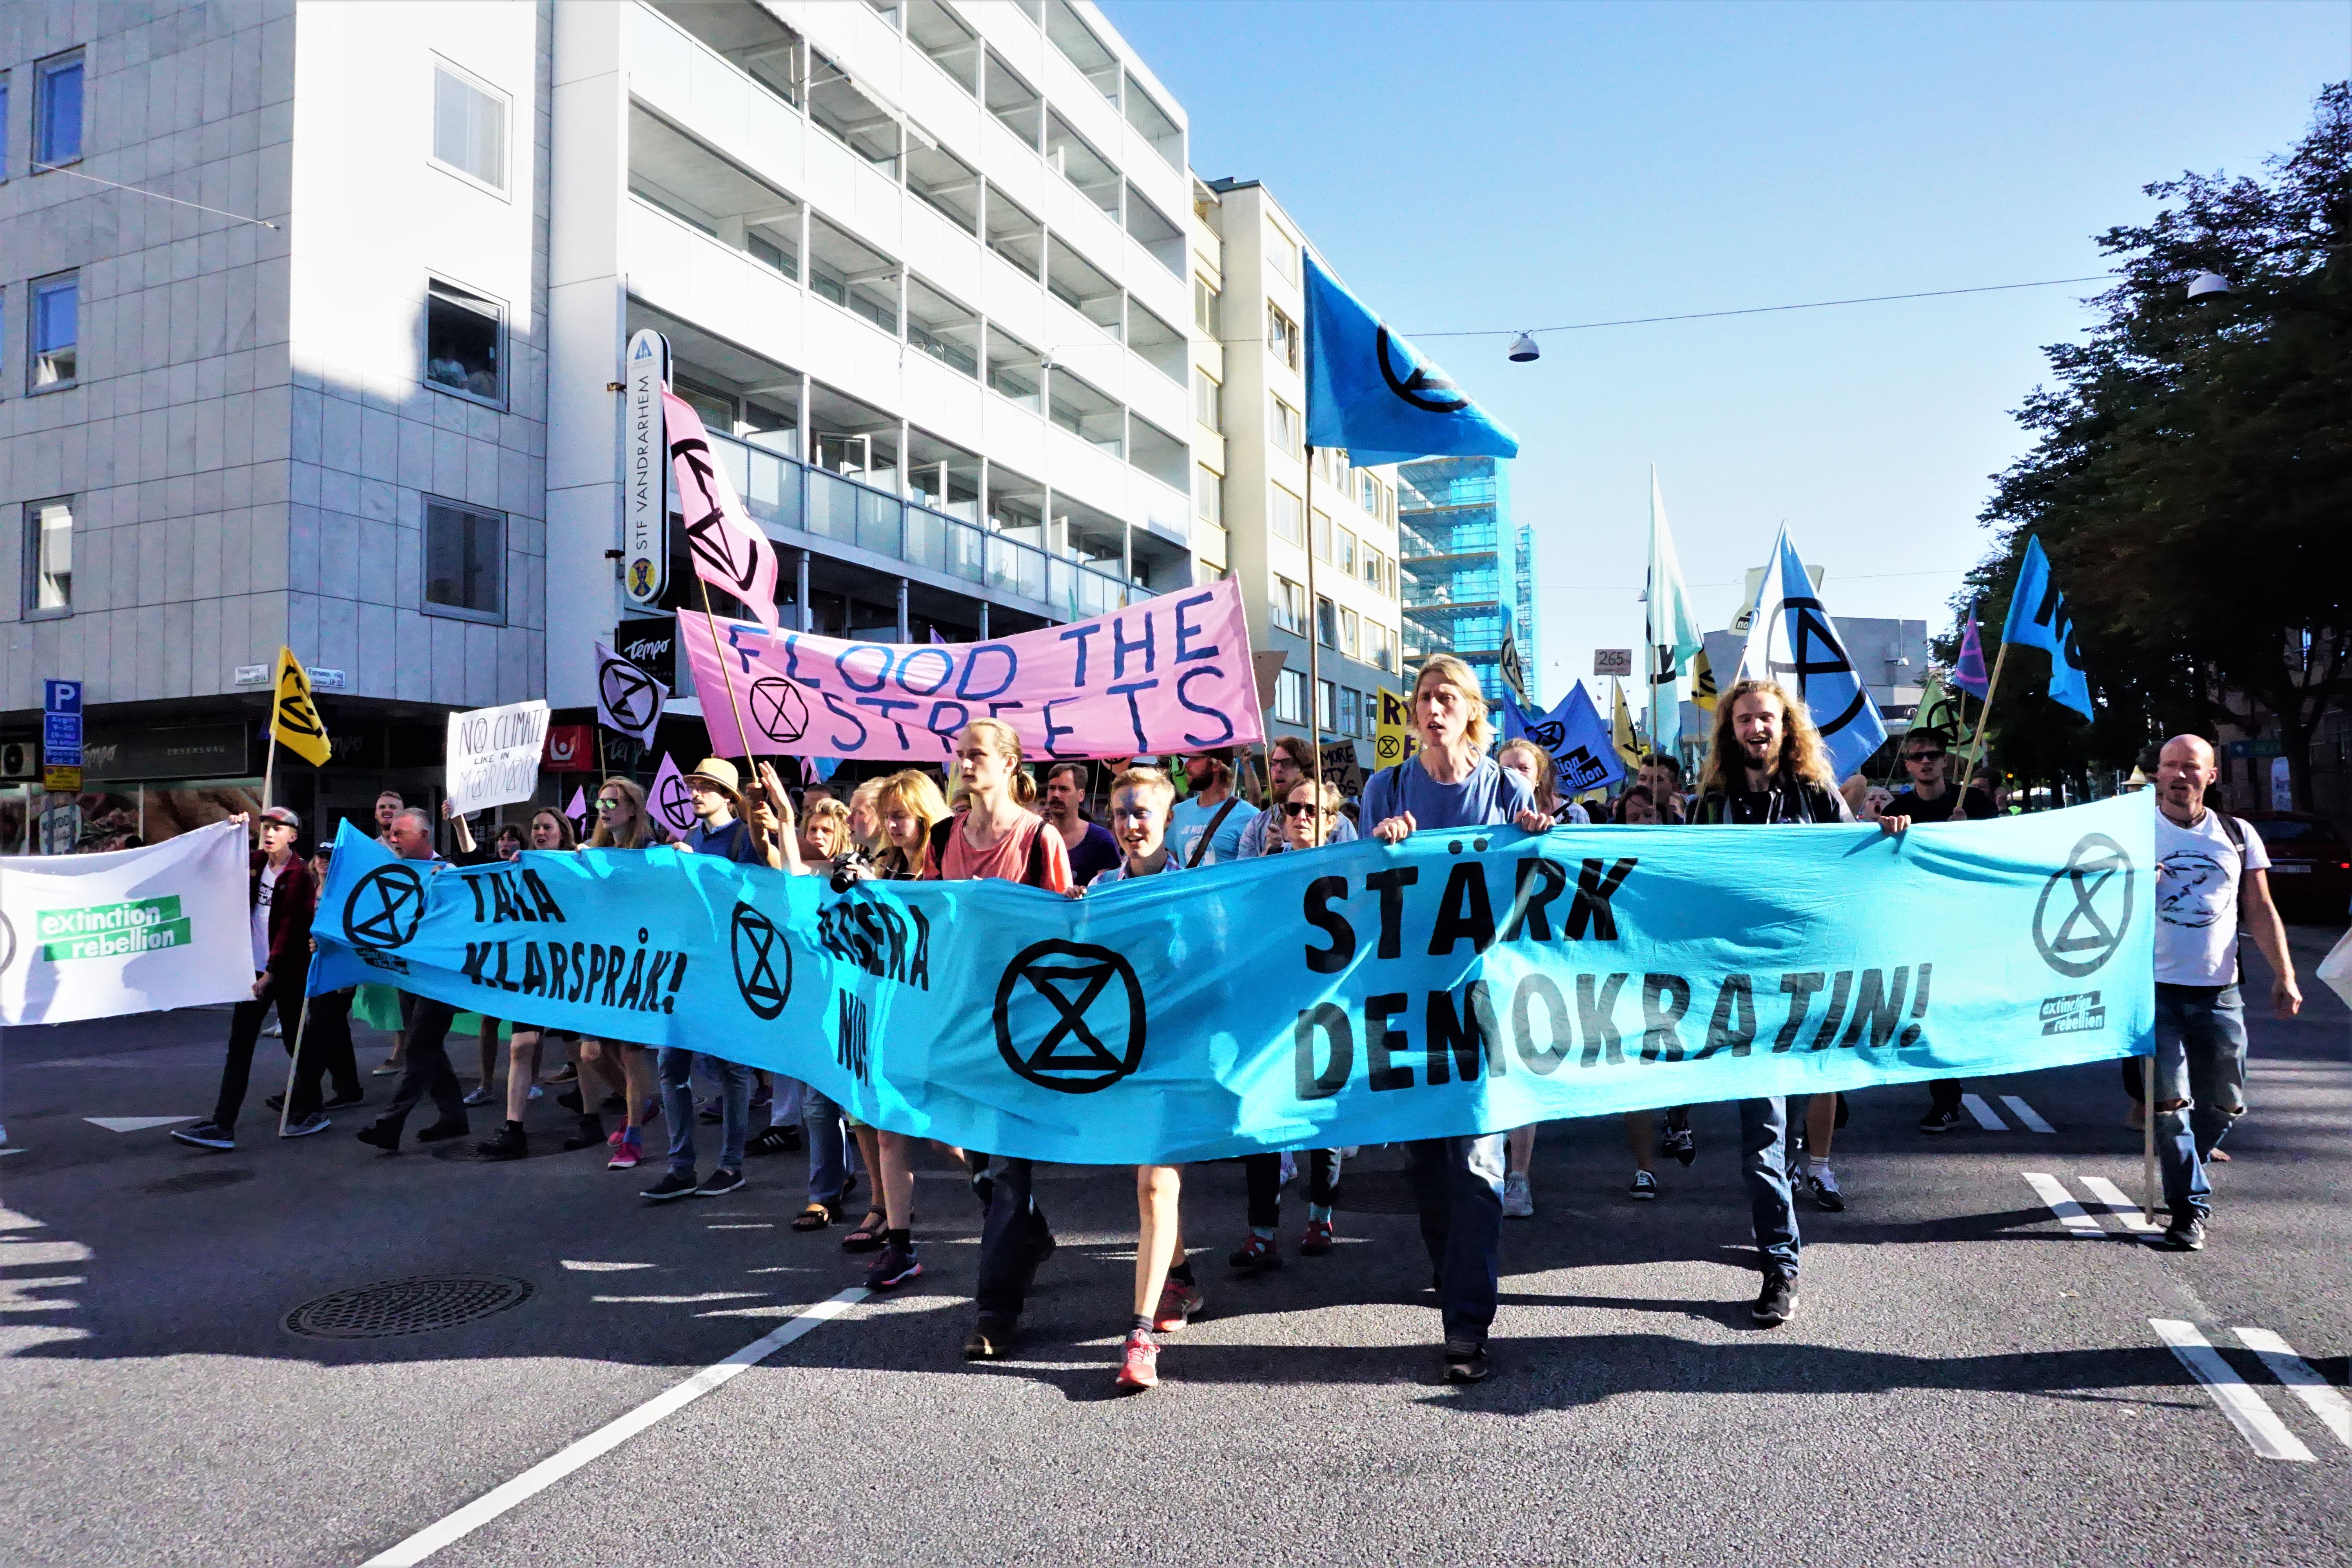 Extinction Rebellion: Creating stoppage to move climate politics forward